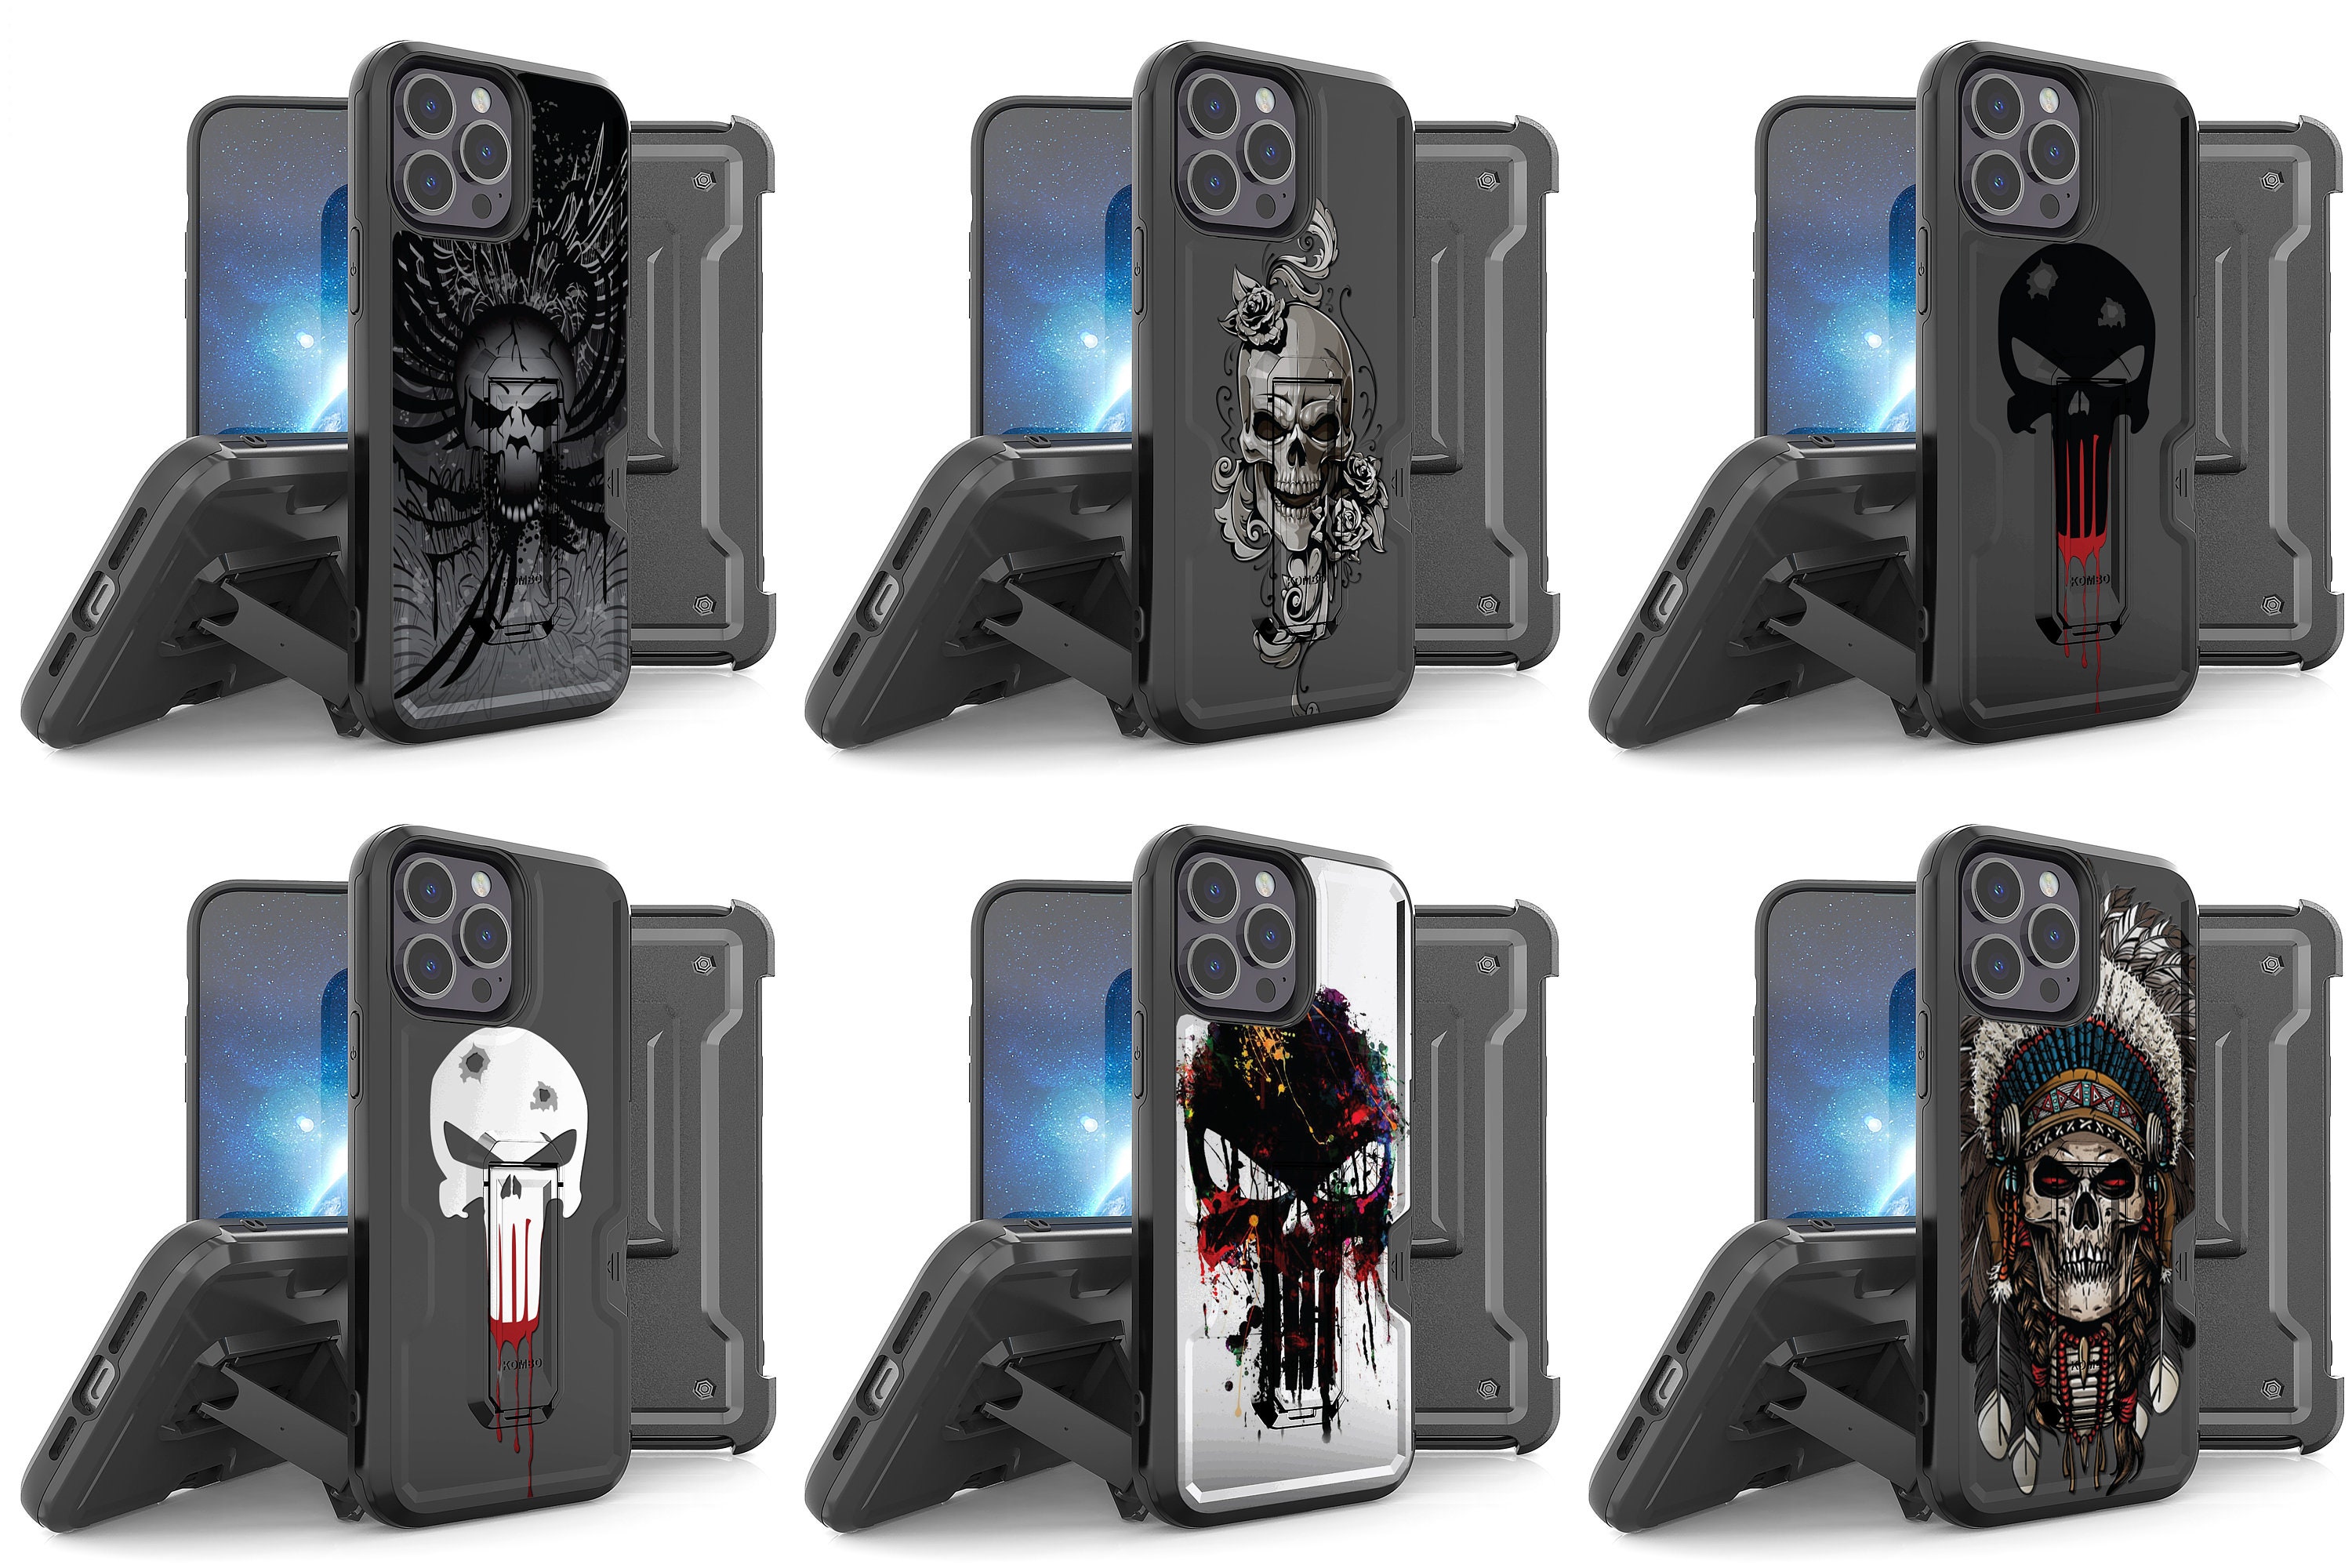  Original Marvel The Punisher TPU Case for iPhone Xs MAX, Liquid  Silicone Cover, Flexible and Slim, Protective for Screen, Shockproof and  Anti-Scratch Phone Case : Cell Phones & Accessories